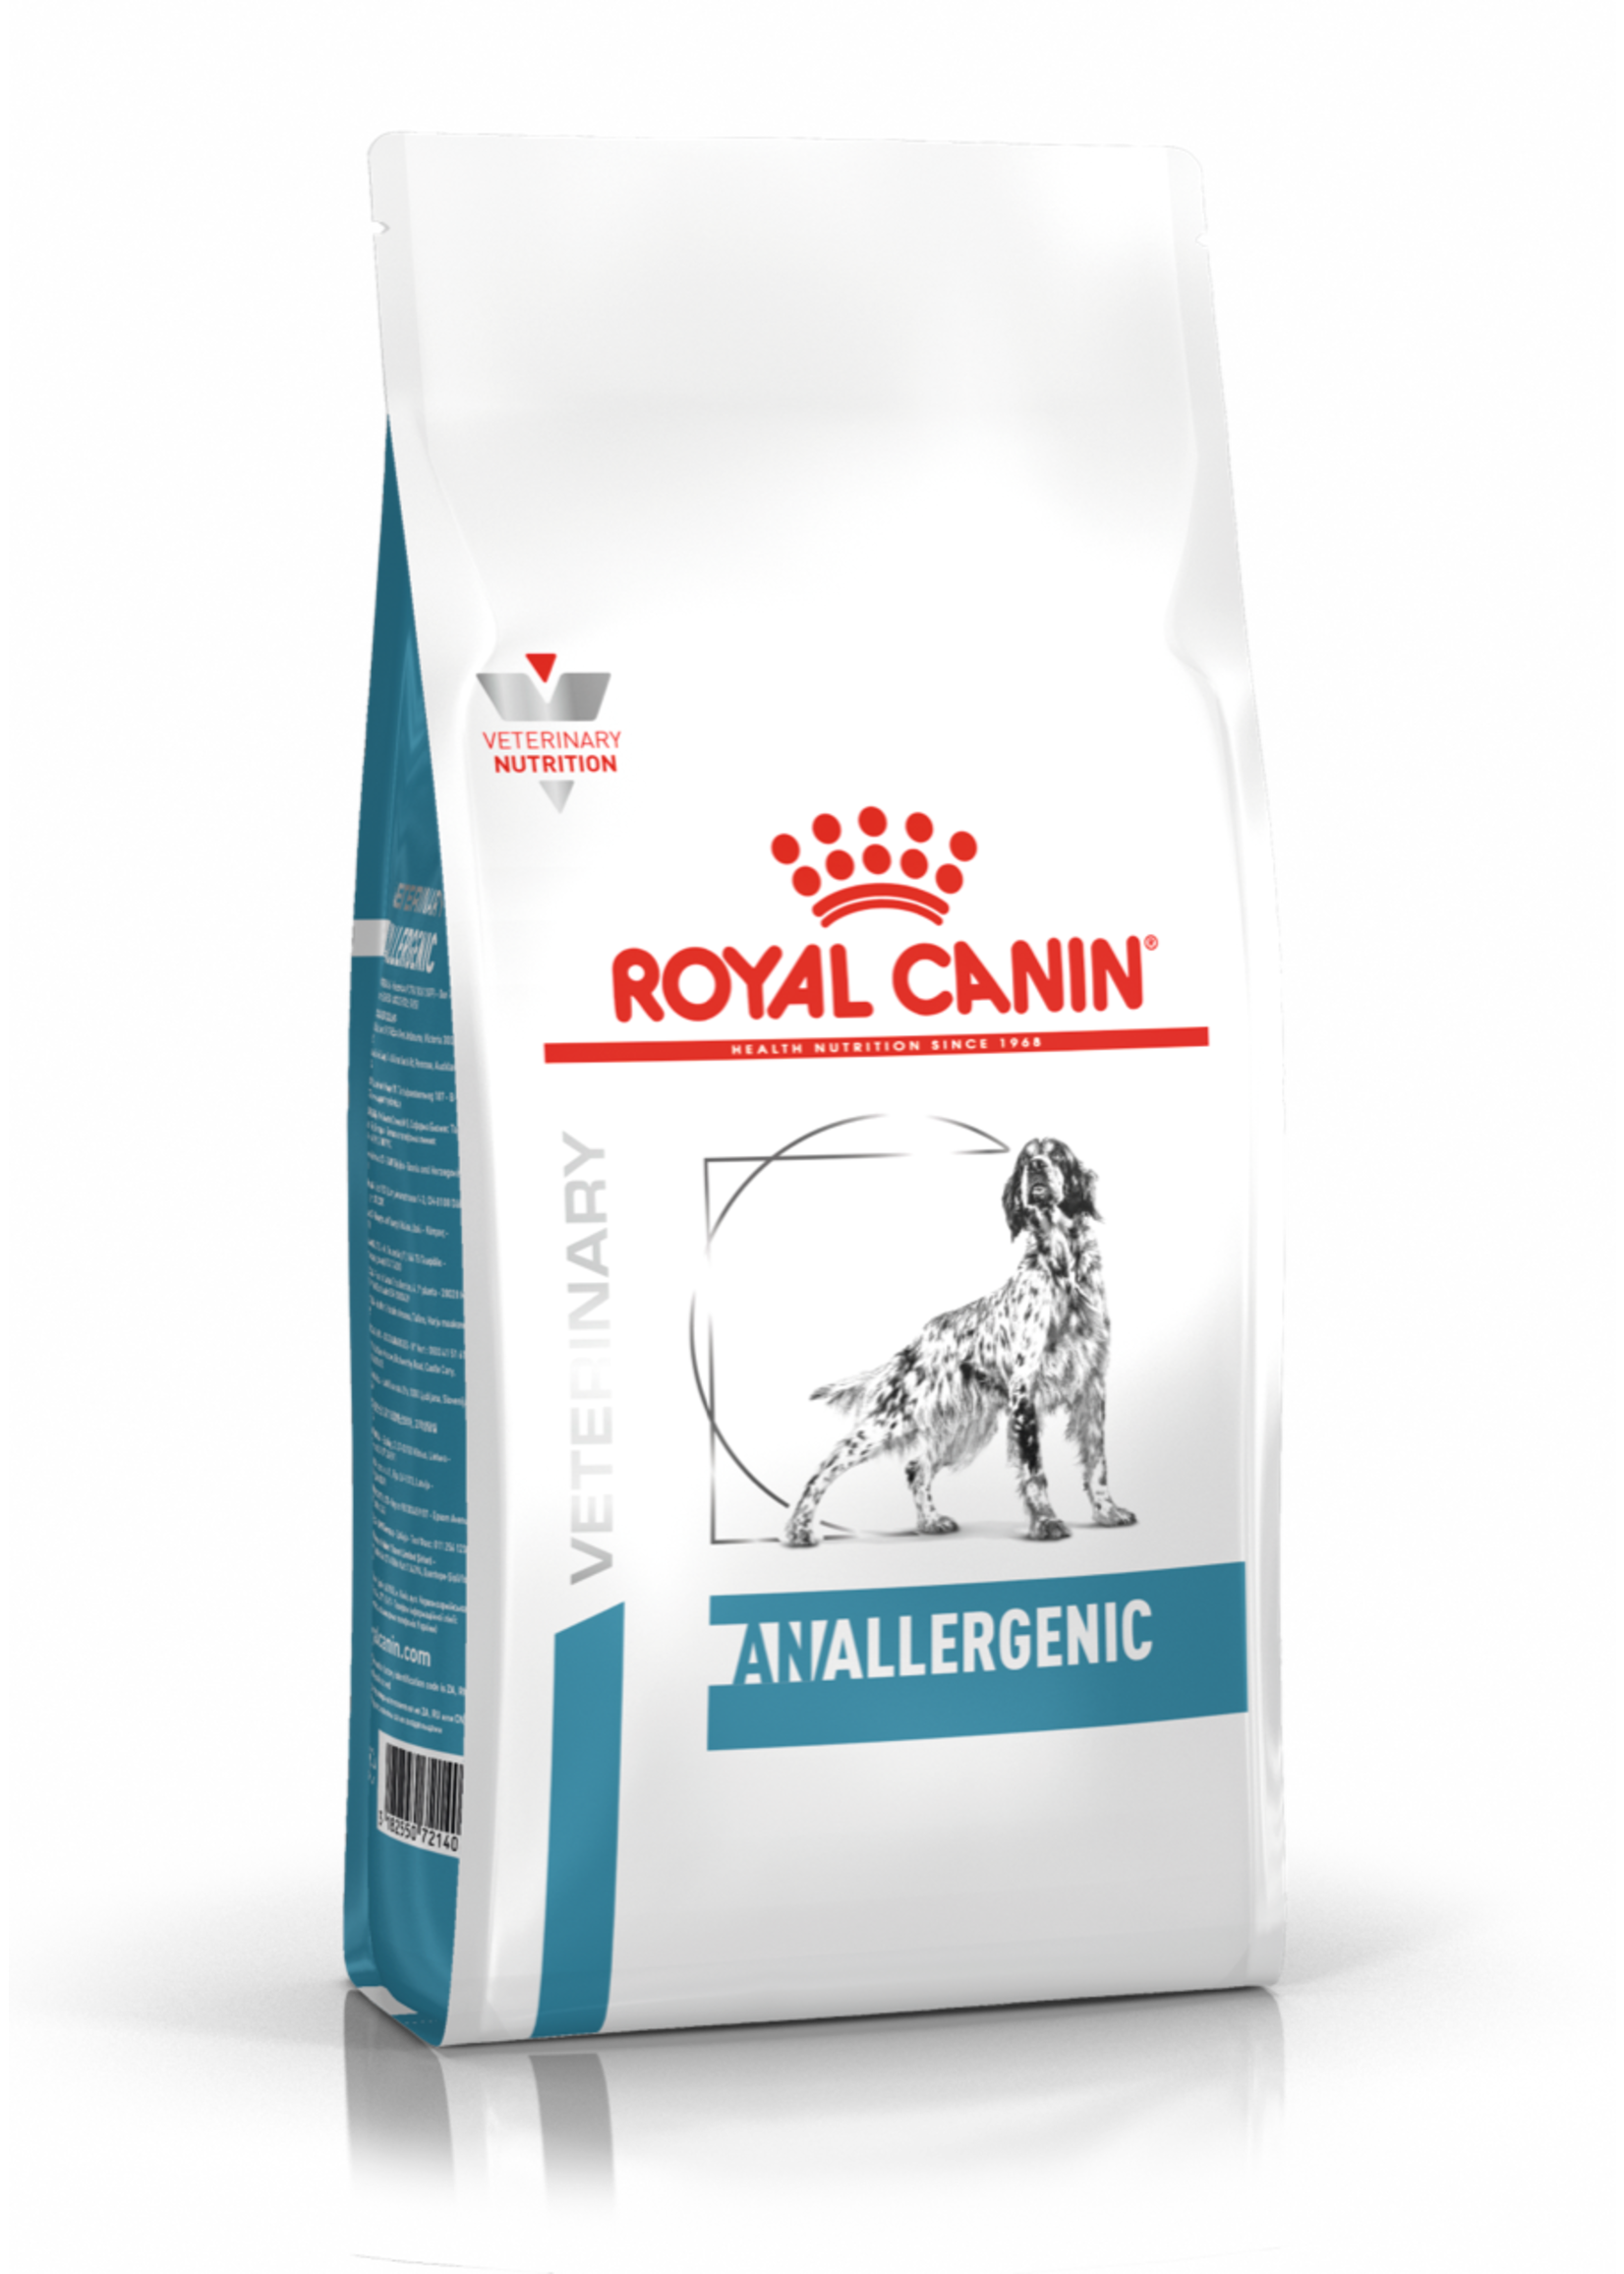 Royal Canin Royal Canin Anallergenic Chien 3kg